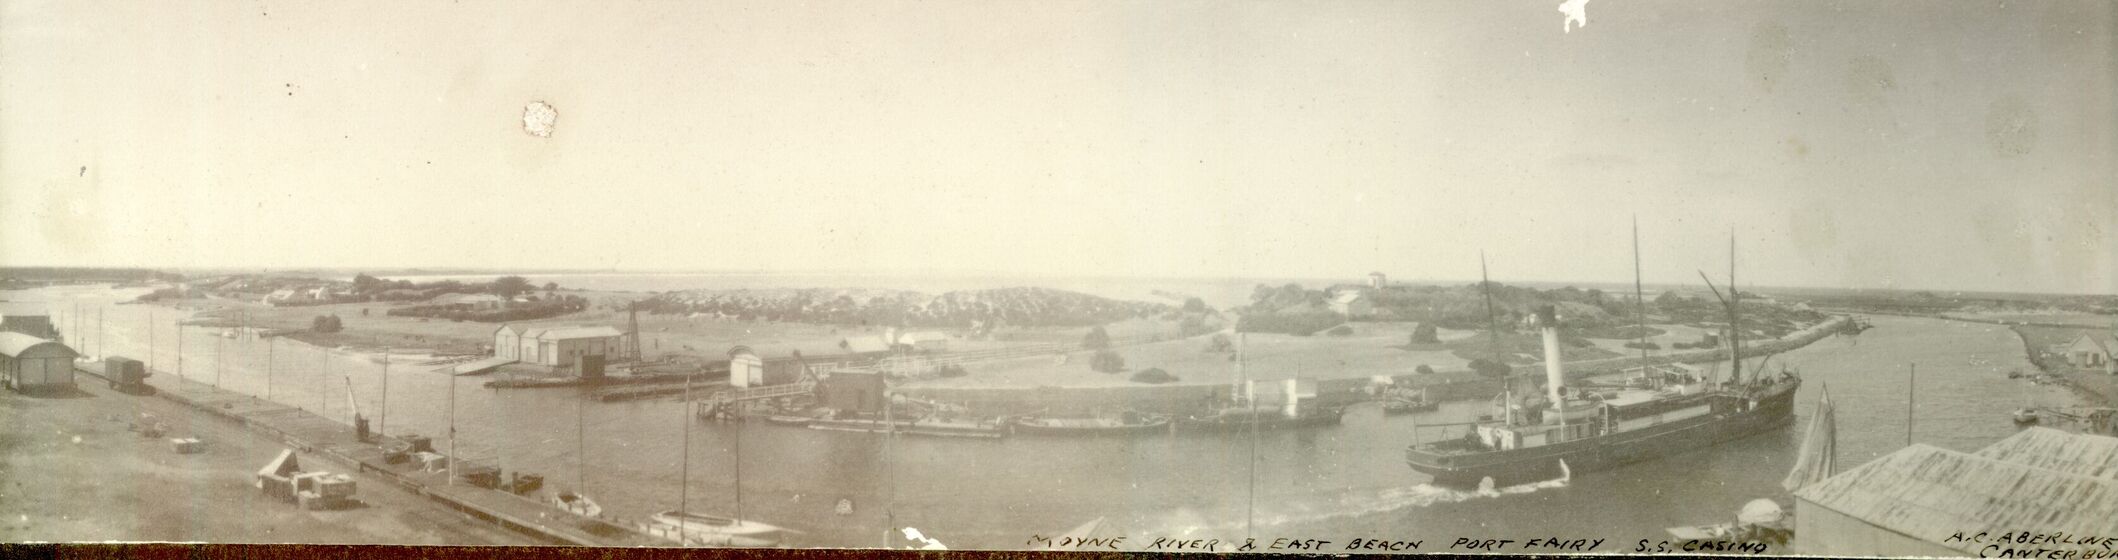 Panoramic photograph of steam ship in port